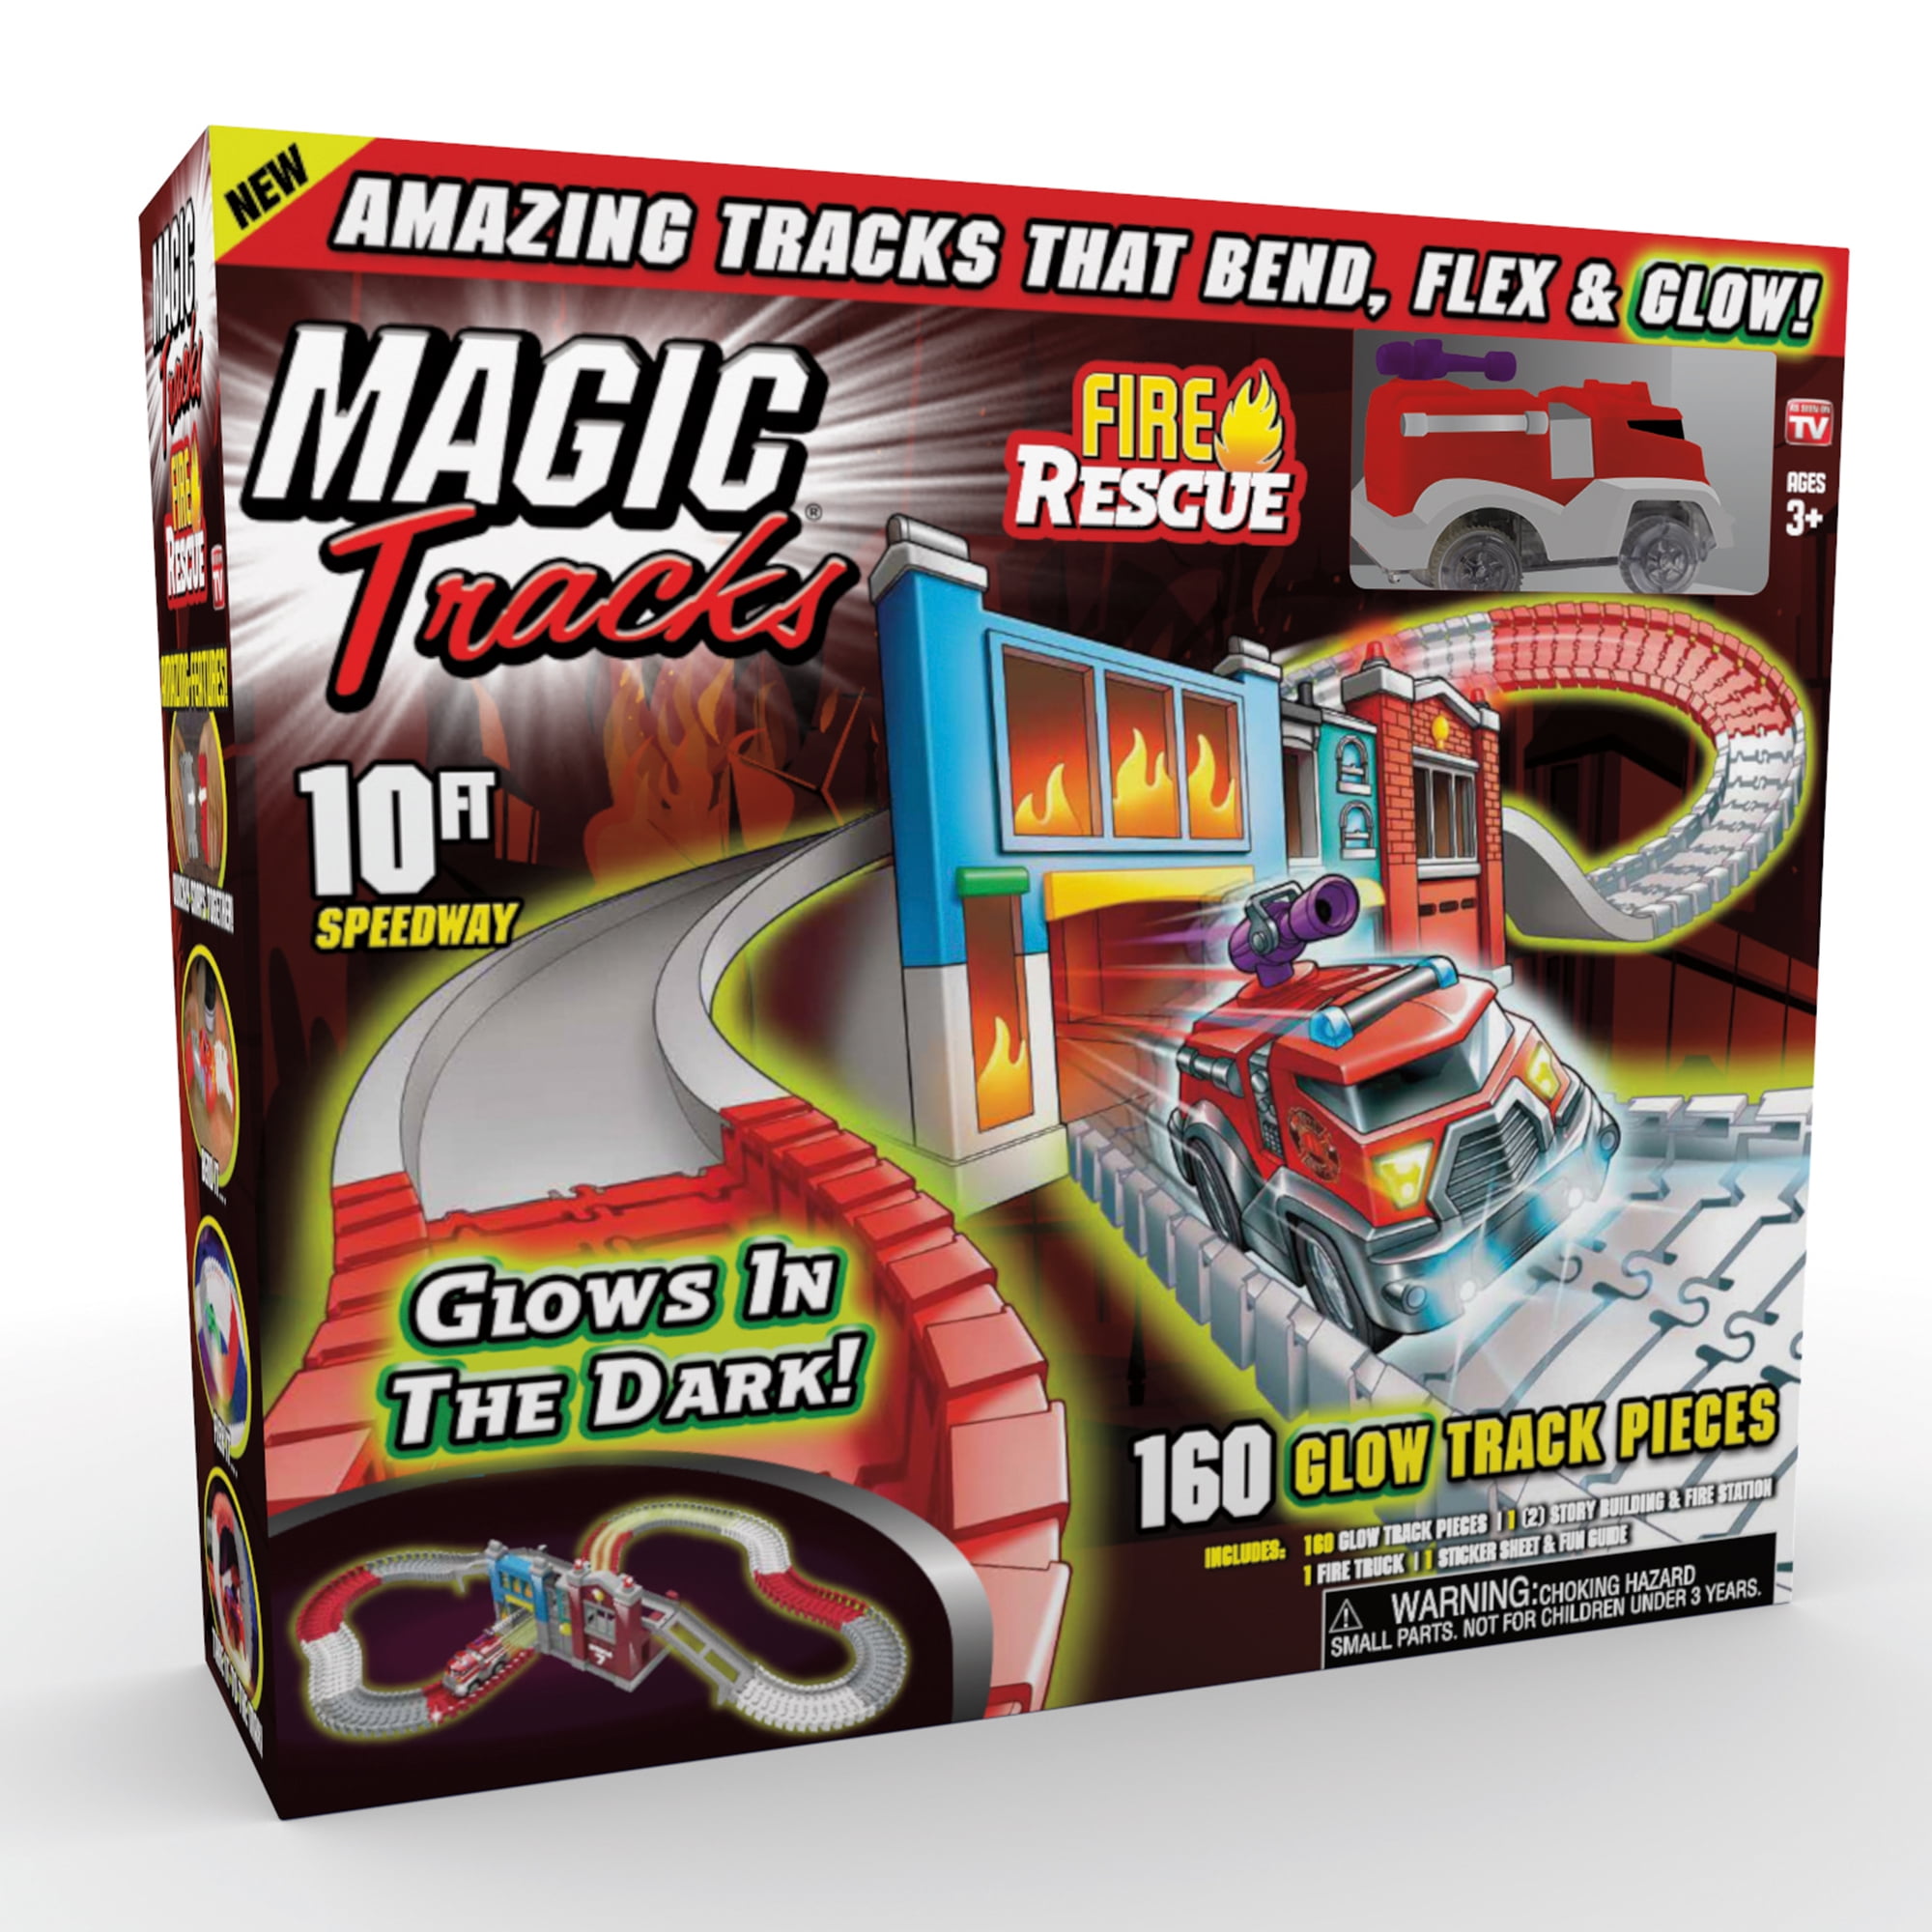 Magic Tracks Kids Toy Christmas Gift Original Packaging SPECIAL DISCOUNT PRICE 